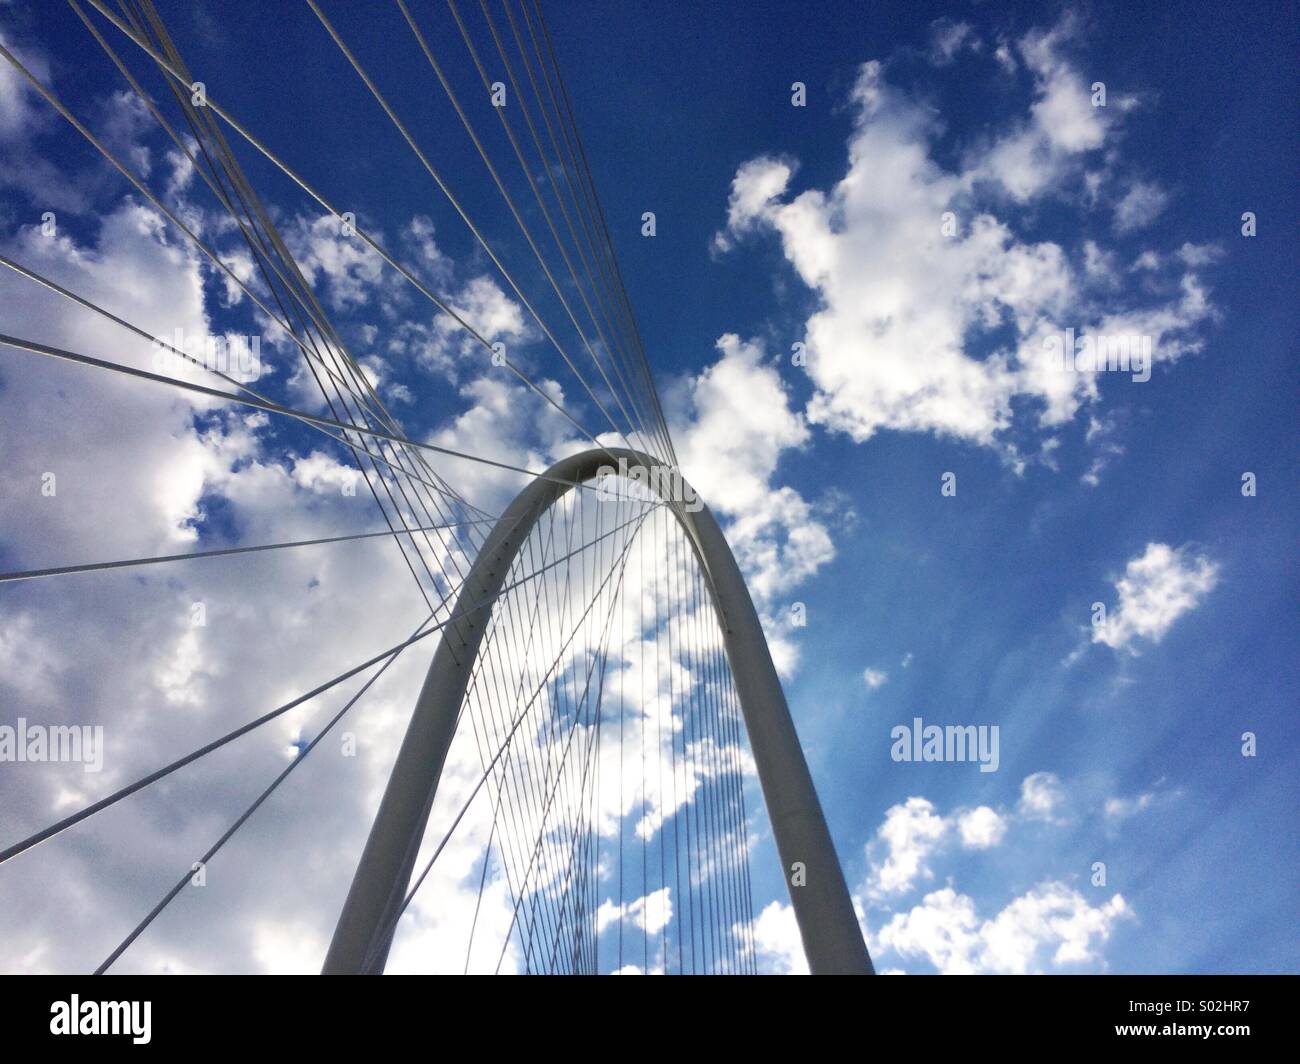 View of a blue sky with puffy white clouds and the Margaret Hunt Hill Bridge designed by Santiago Calatrava in Dallas, Texas. Stock Photo